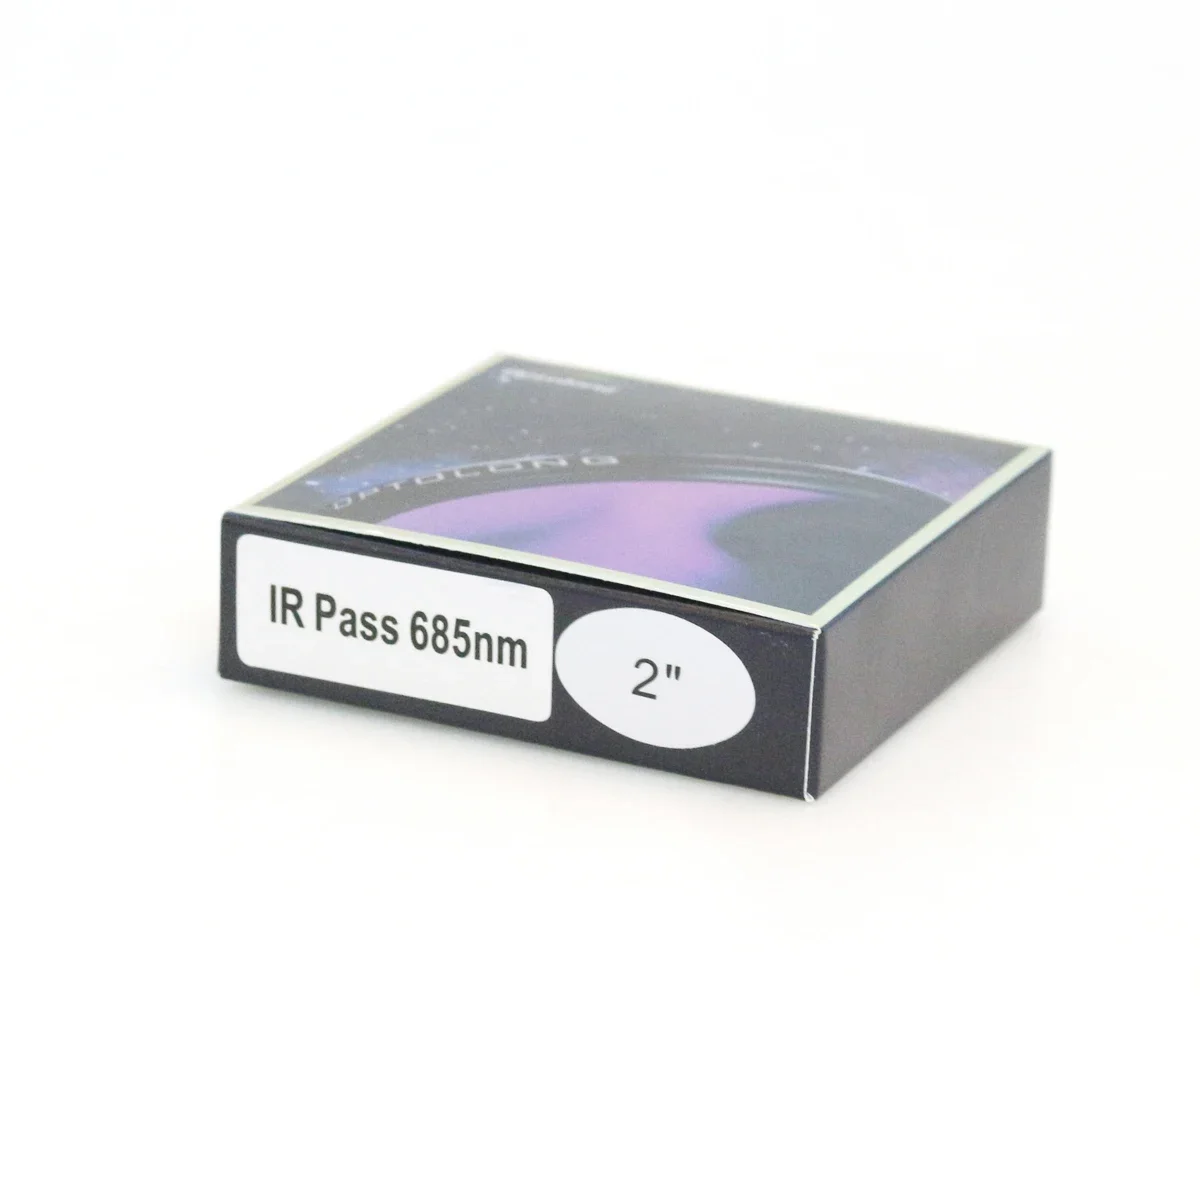 

Optolong-IR Pass Filter, Reduce the Effects of Seeing for Planetary Photography, Contrast Enhancement,2 in, 685nm LD2054B